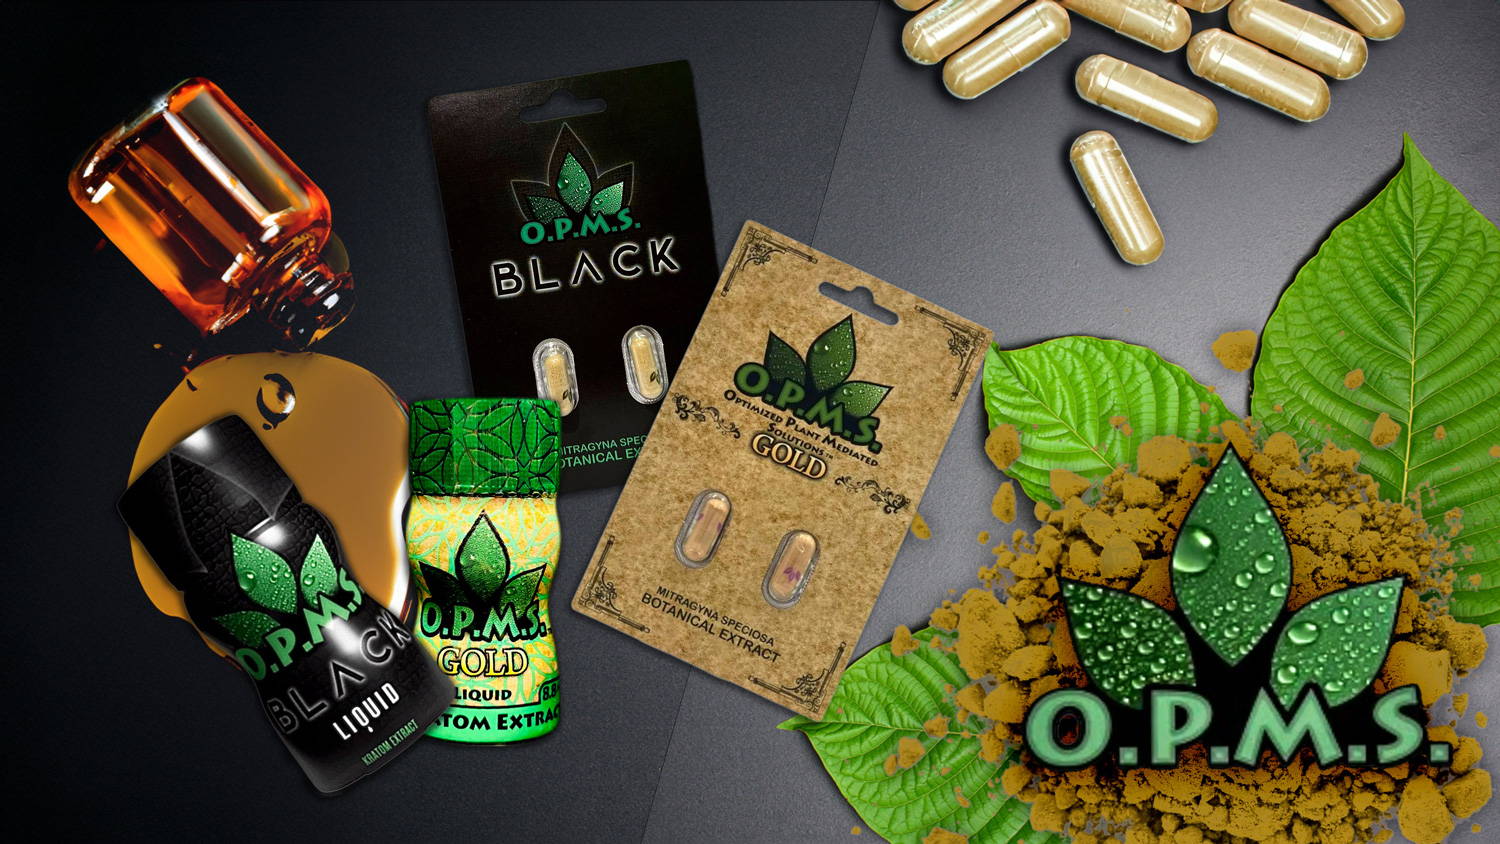 OPMS Gold and Black 2ct. Capsules and Shot Banner